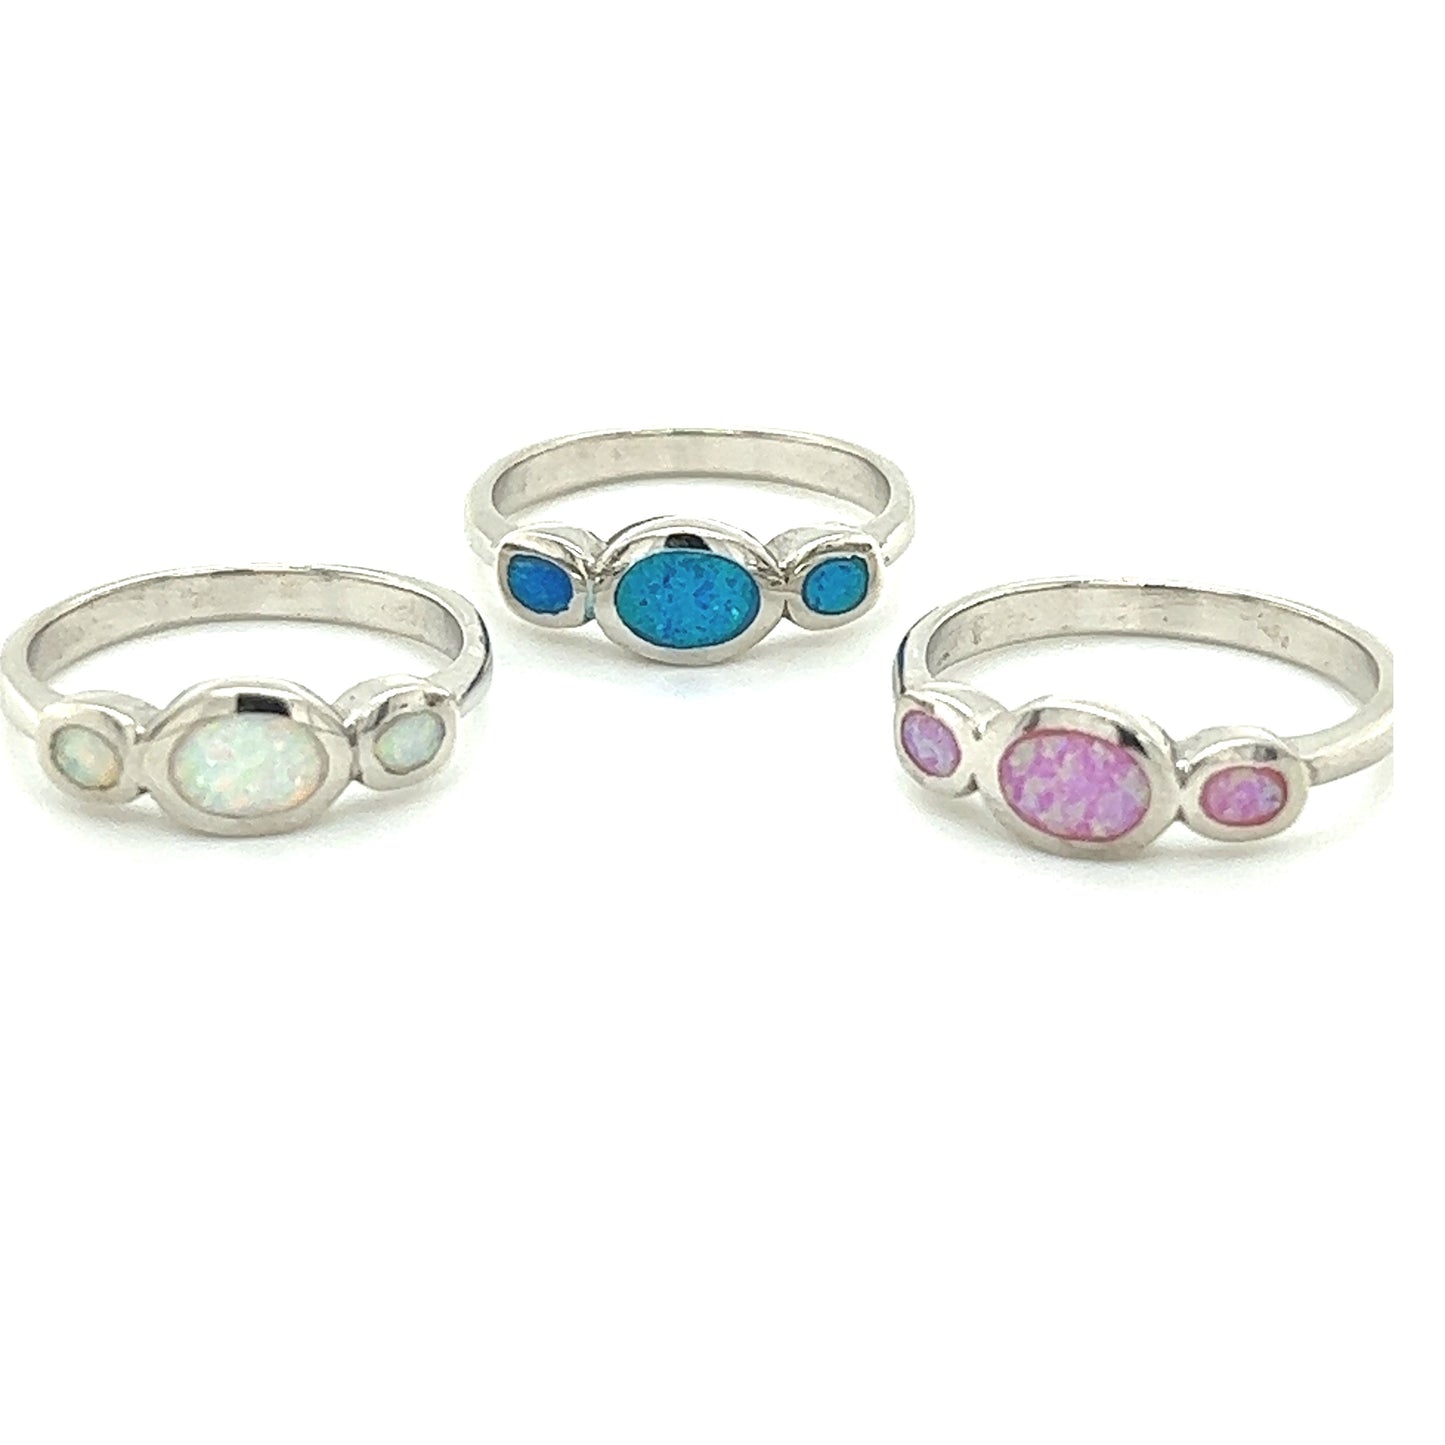 Three Super Silver Triple Oval Opal Rings, with blue, pink and white opals, showcasing elegance and a rhodium finish.